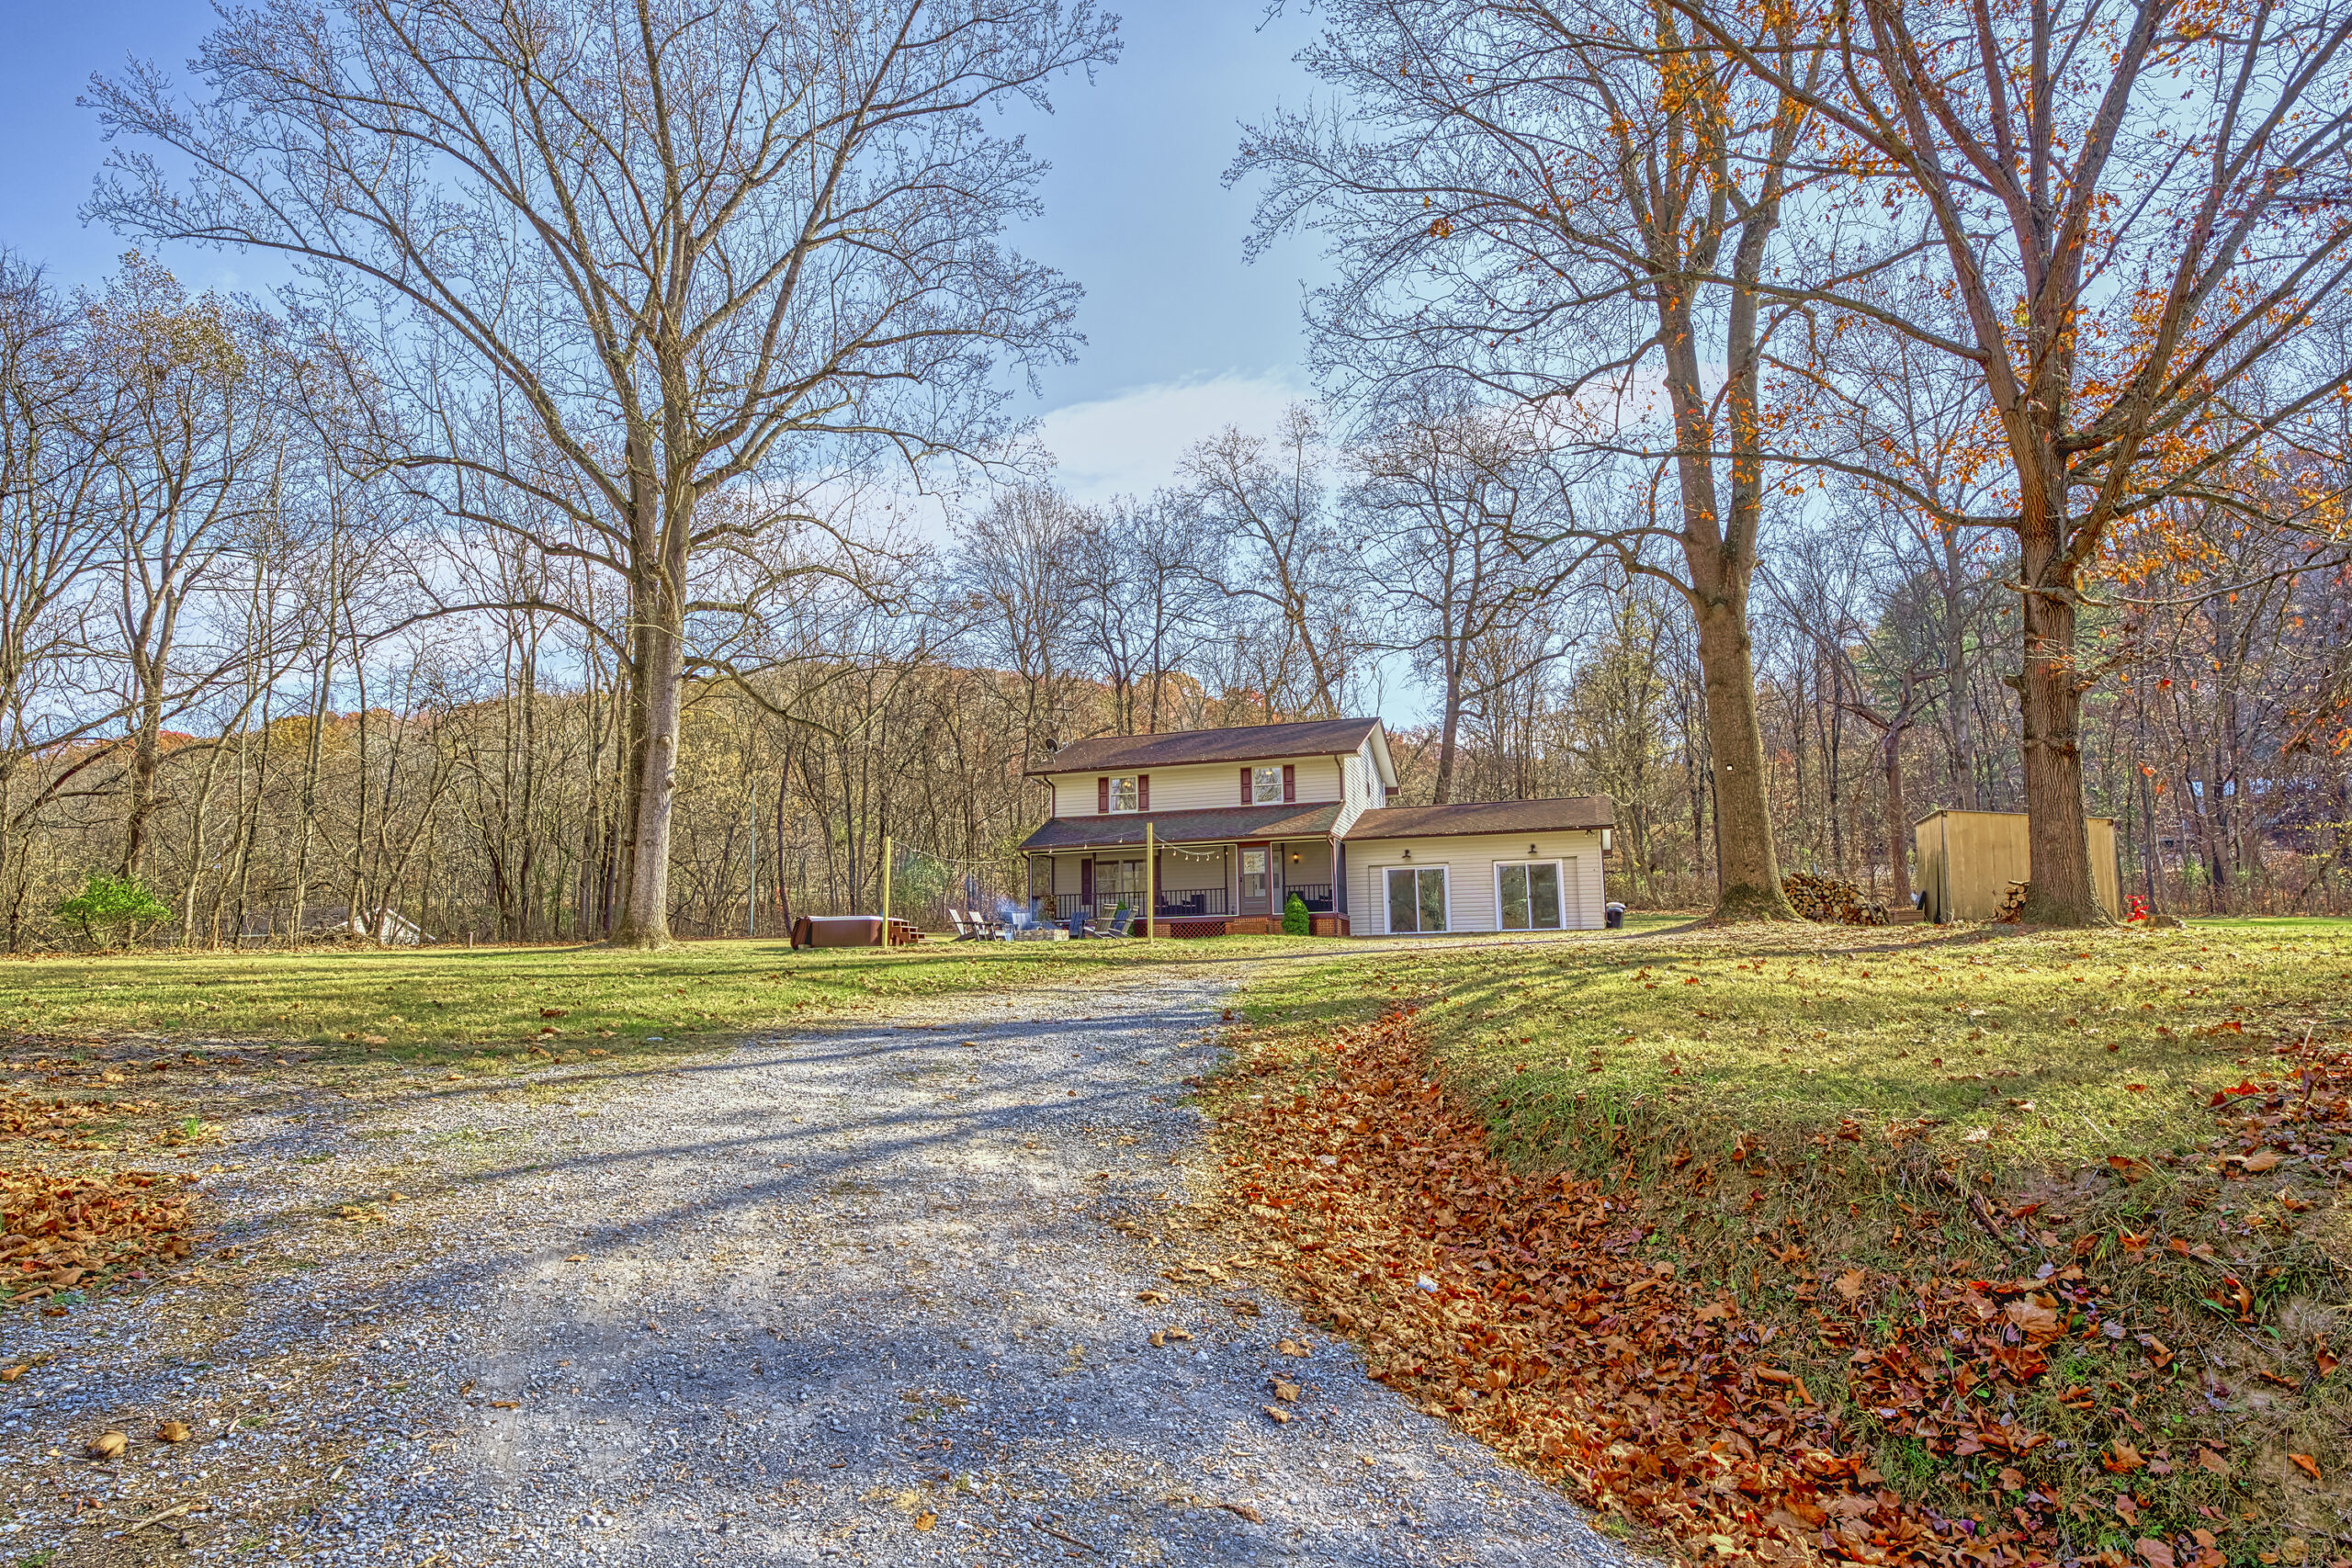 Professional exterior photo of 4809 Grove Hill River Rd - showing the view looking up the driveway to the front of a transitional 2-story home with screened front porch, front stone patio with fire pit and nearby hot tub